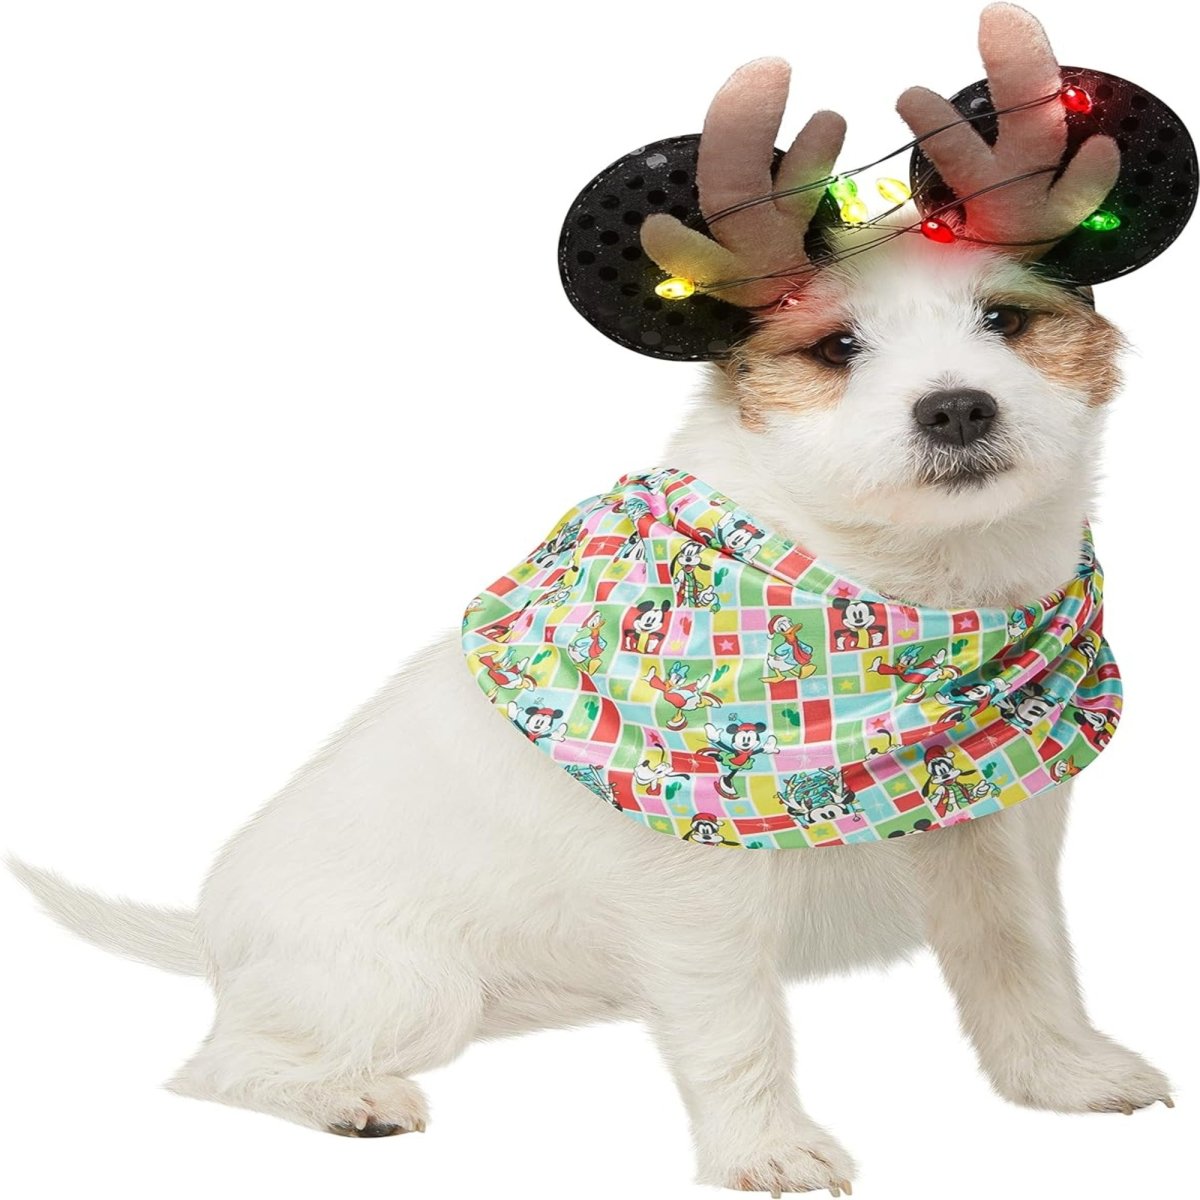 Rubie's Disney Reindeer Light Up Holiday Ears and Antlers with Infinity Scarf for Pets - worldclasscostumes